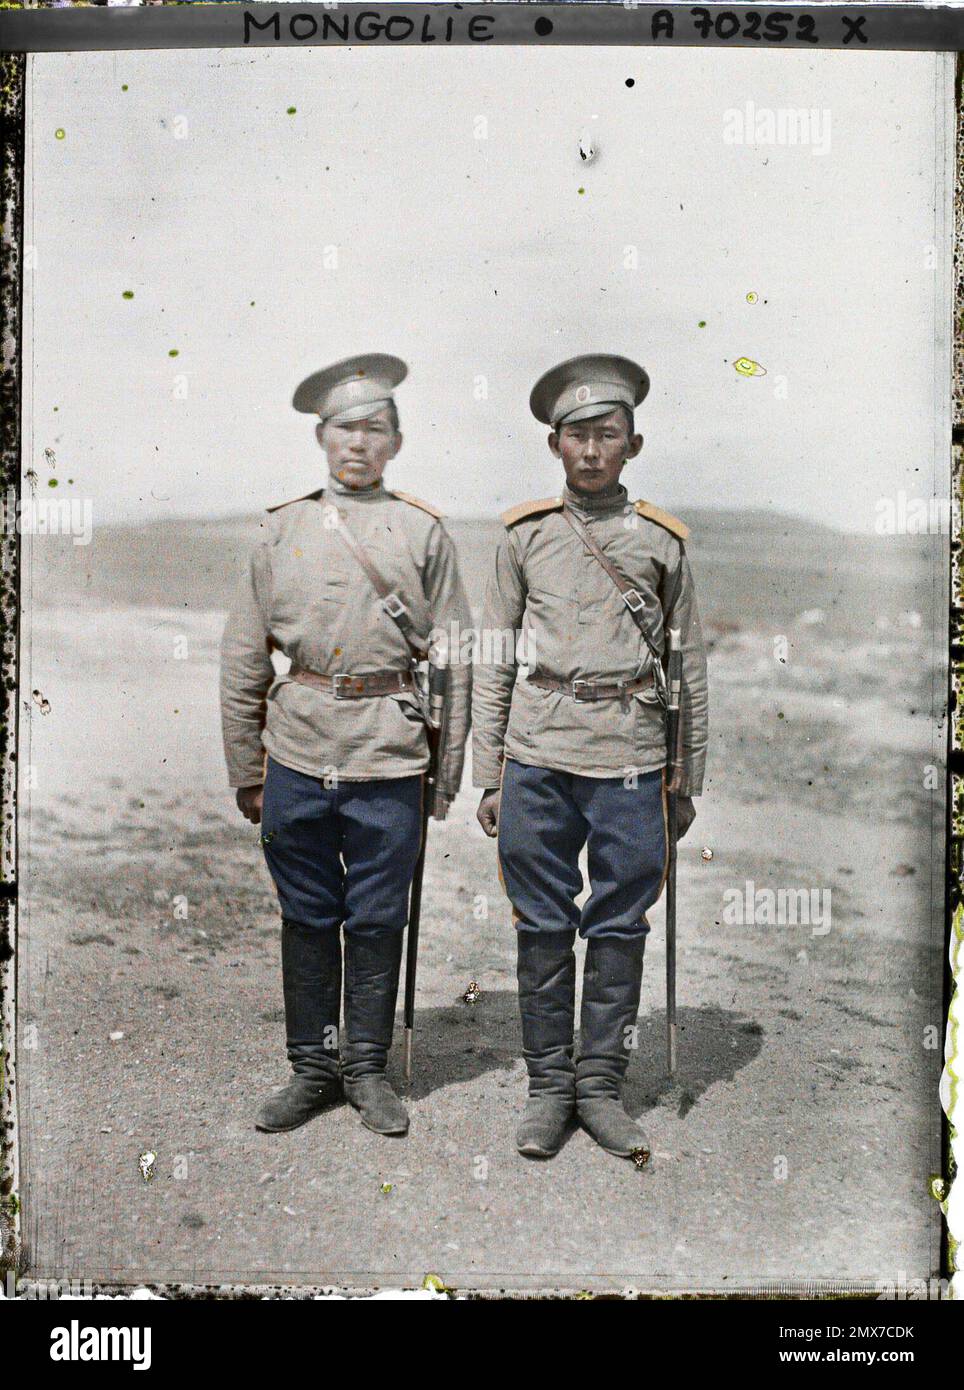 Ourga, Mongolia two Cossack soldiers , 1913 - Mongolia - Stéphane Passet - (July 6-25) Stock Photo